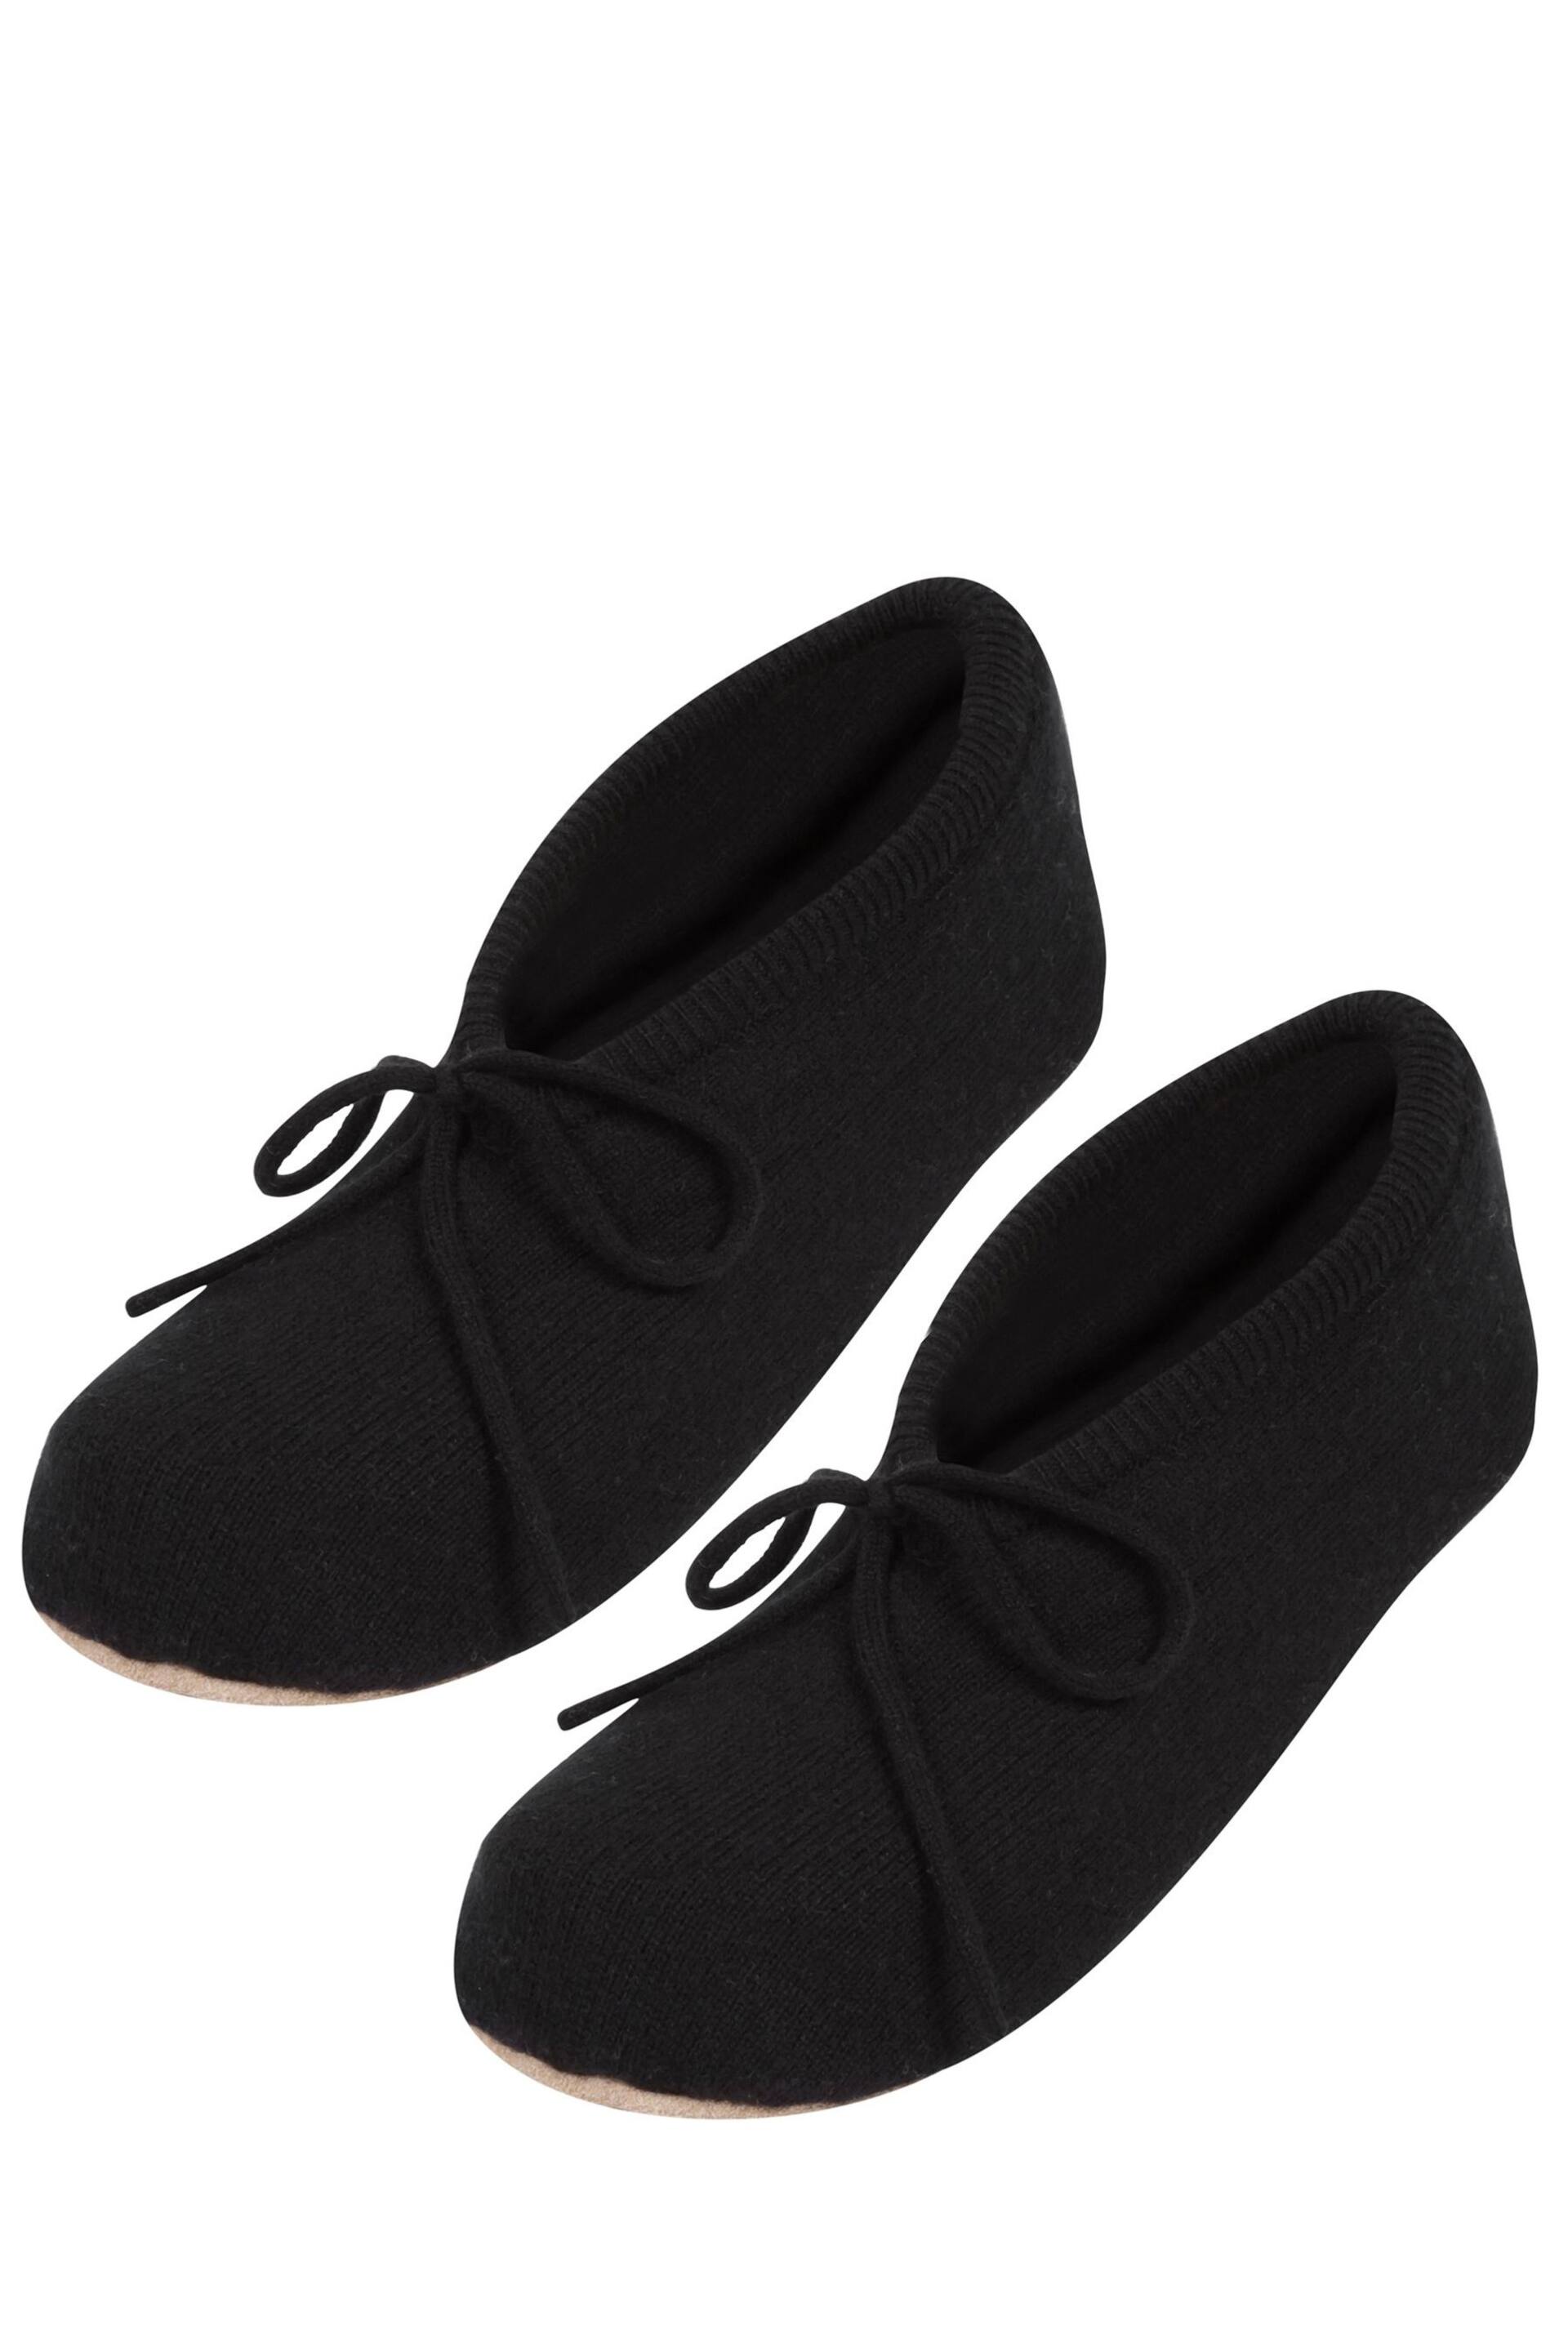 Pure Luxuries London Millom Cashmere & Merino Wool Slippers - Image 1 of 5